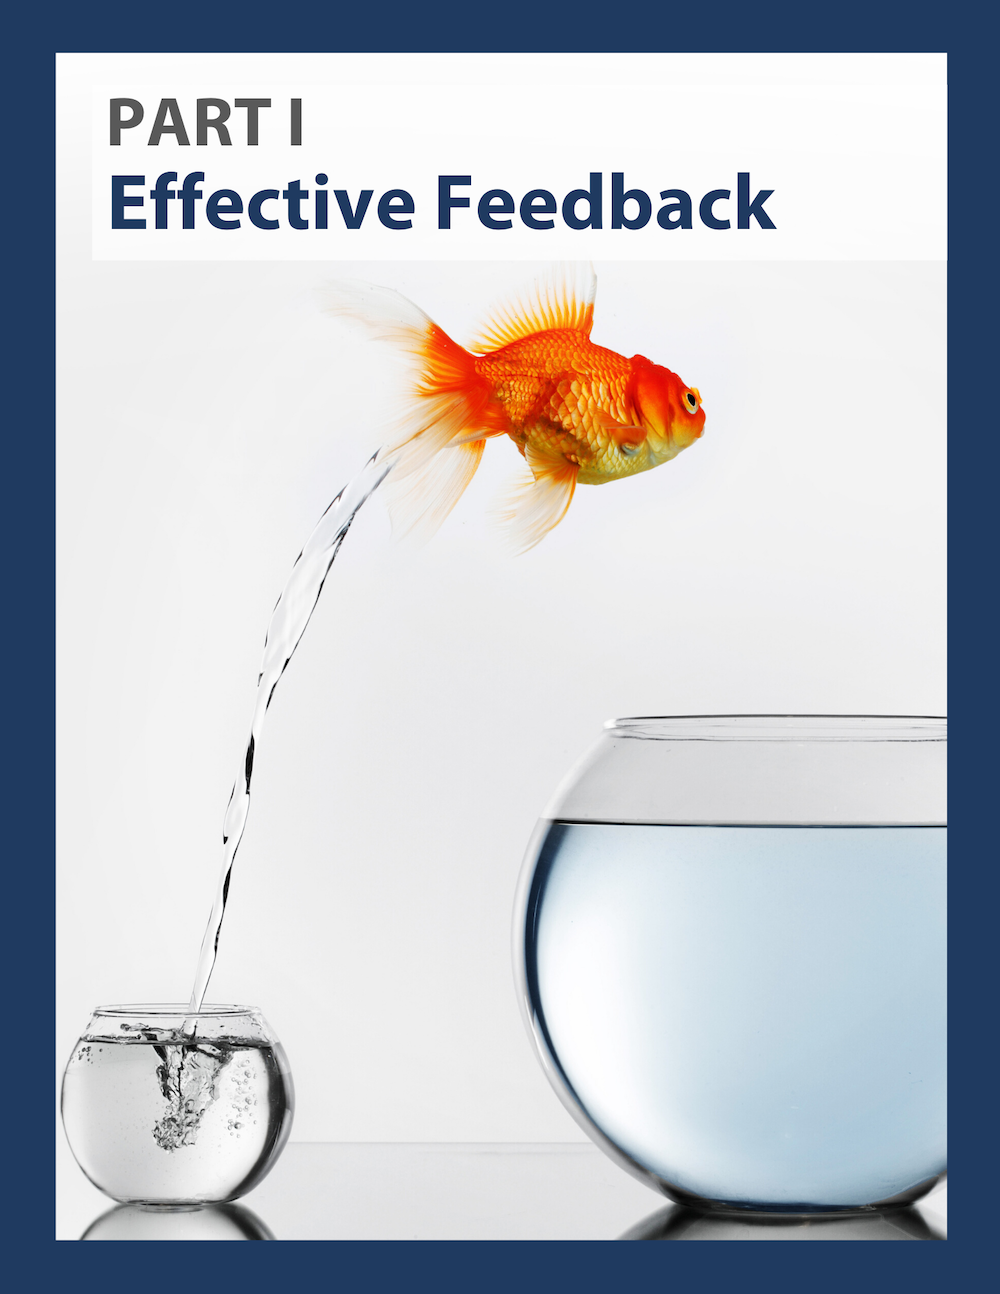 Link to a PDF  - Part 1: Effective Feedback